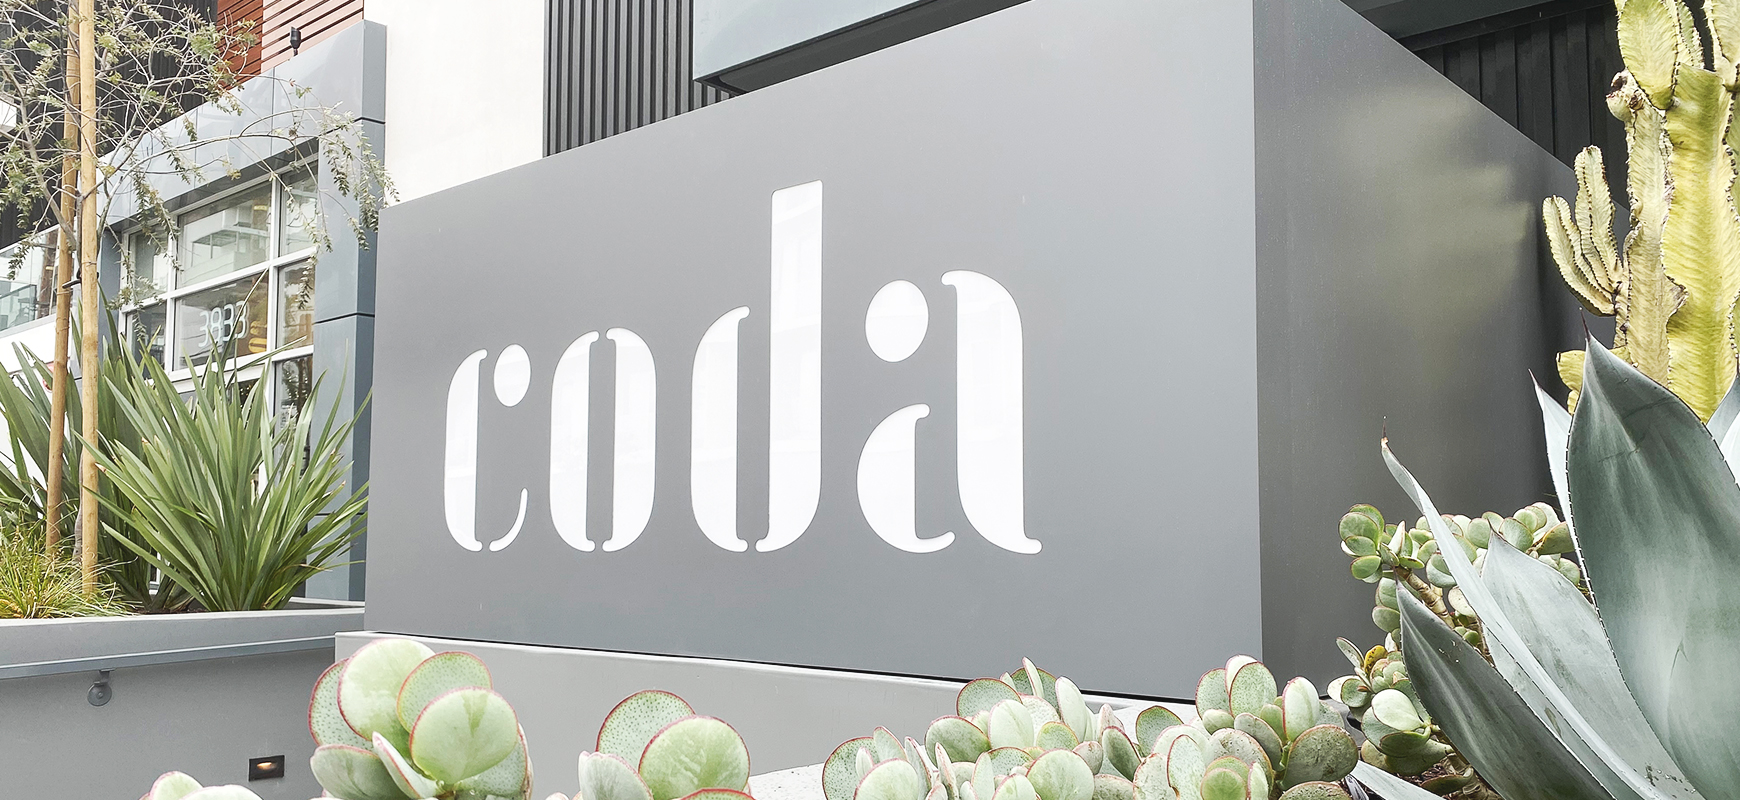 Coda light-up aluminum sign in a big size displaying the company name for outdoor branding